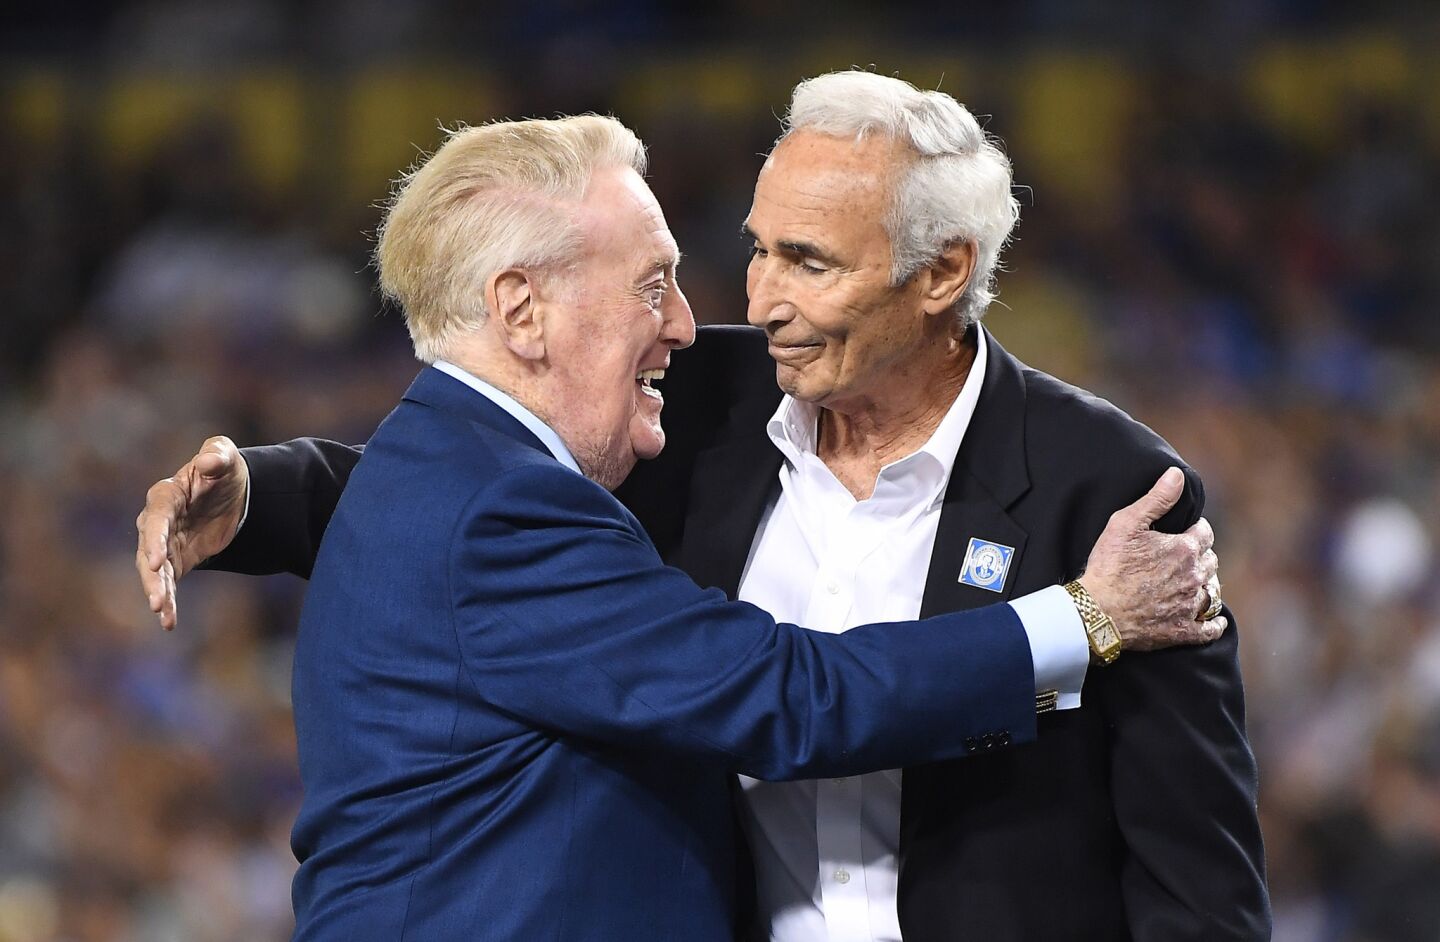 Vin Scully and Hall-of-Fame pitcher Sandy Koufax embrace during the pregame ceremony honoring the Dodgers broadcaster on Sept. 23, 2016.